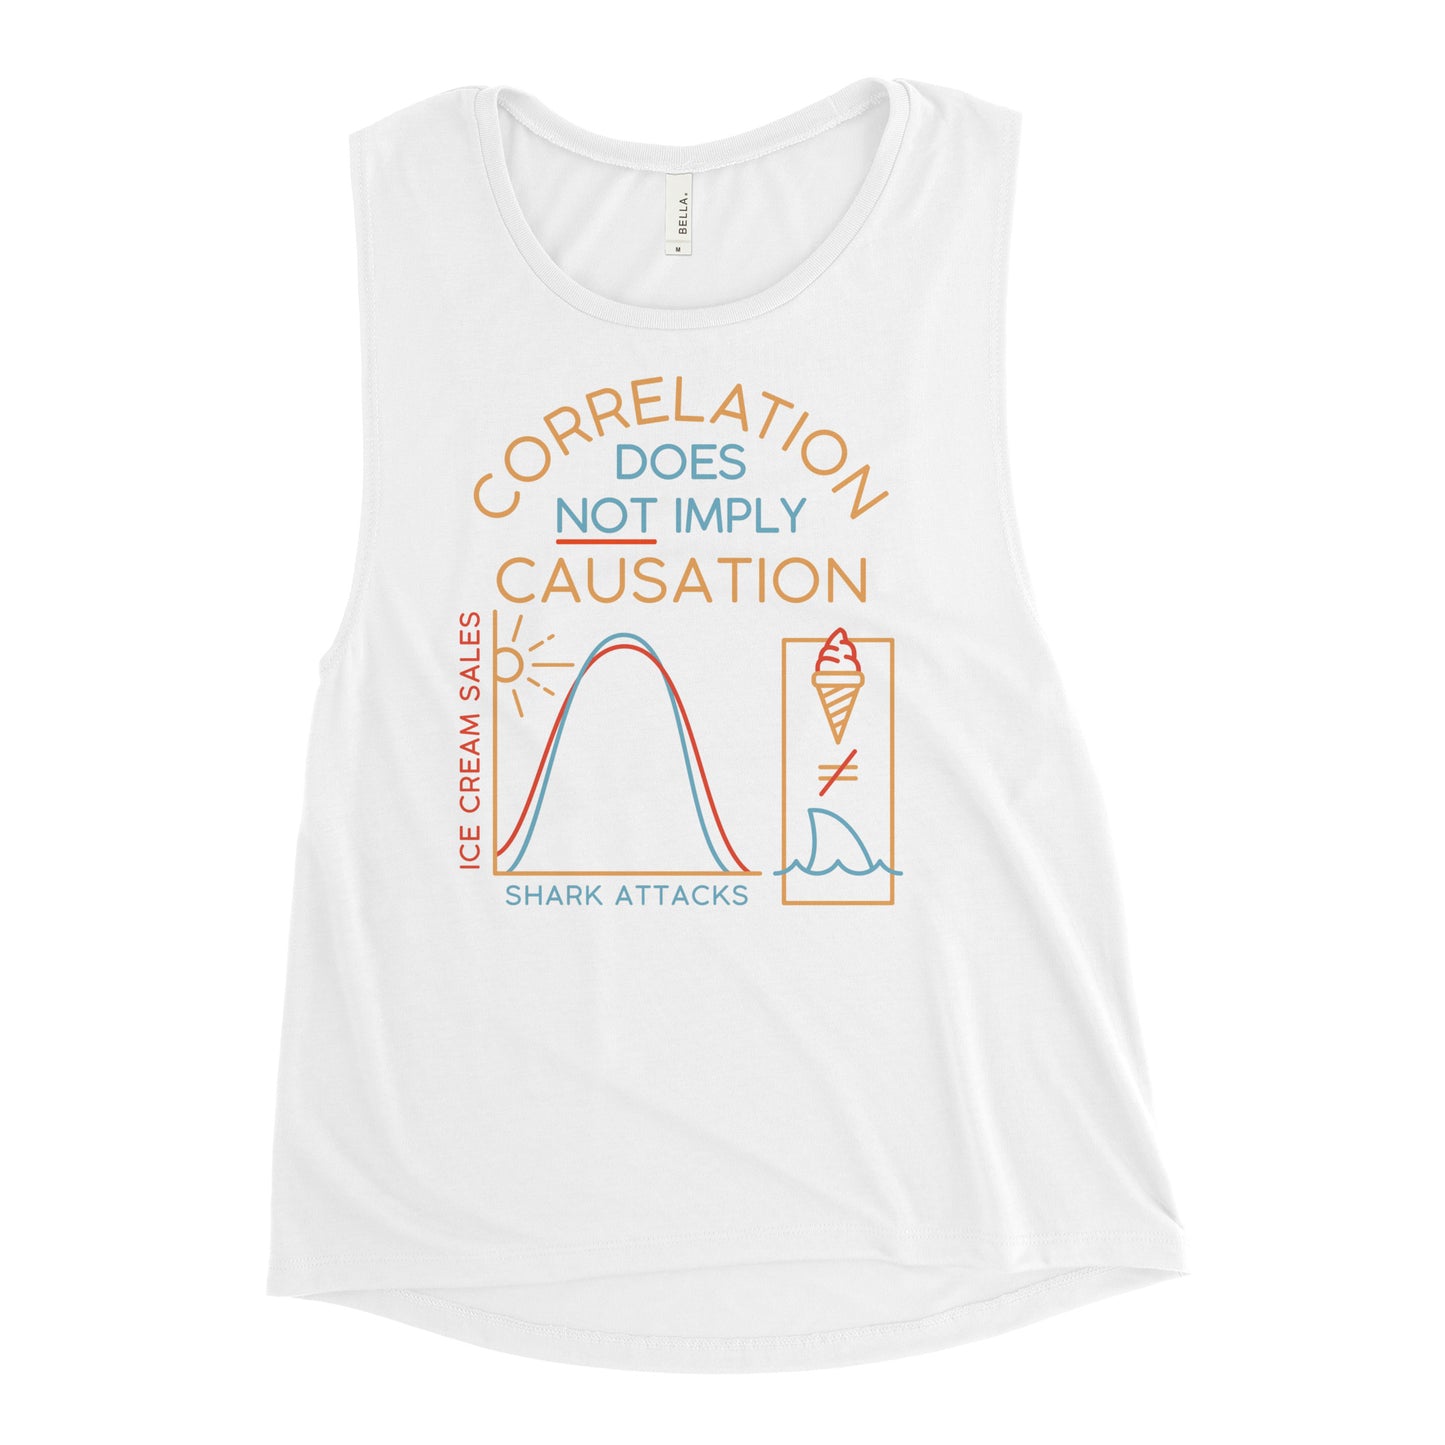 Correlation Does Not Imply Causation Women's Muscle Tank